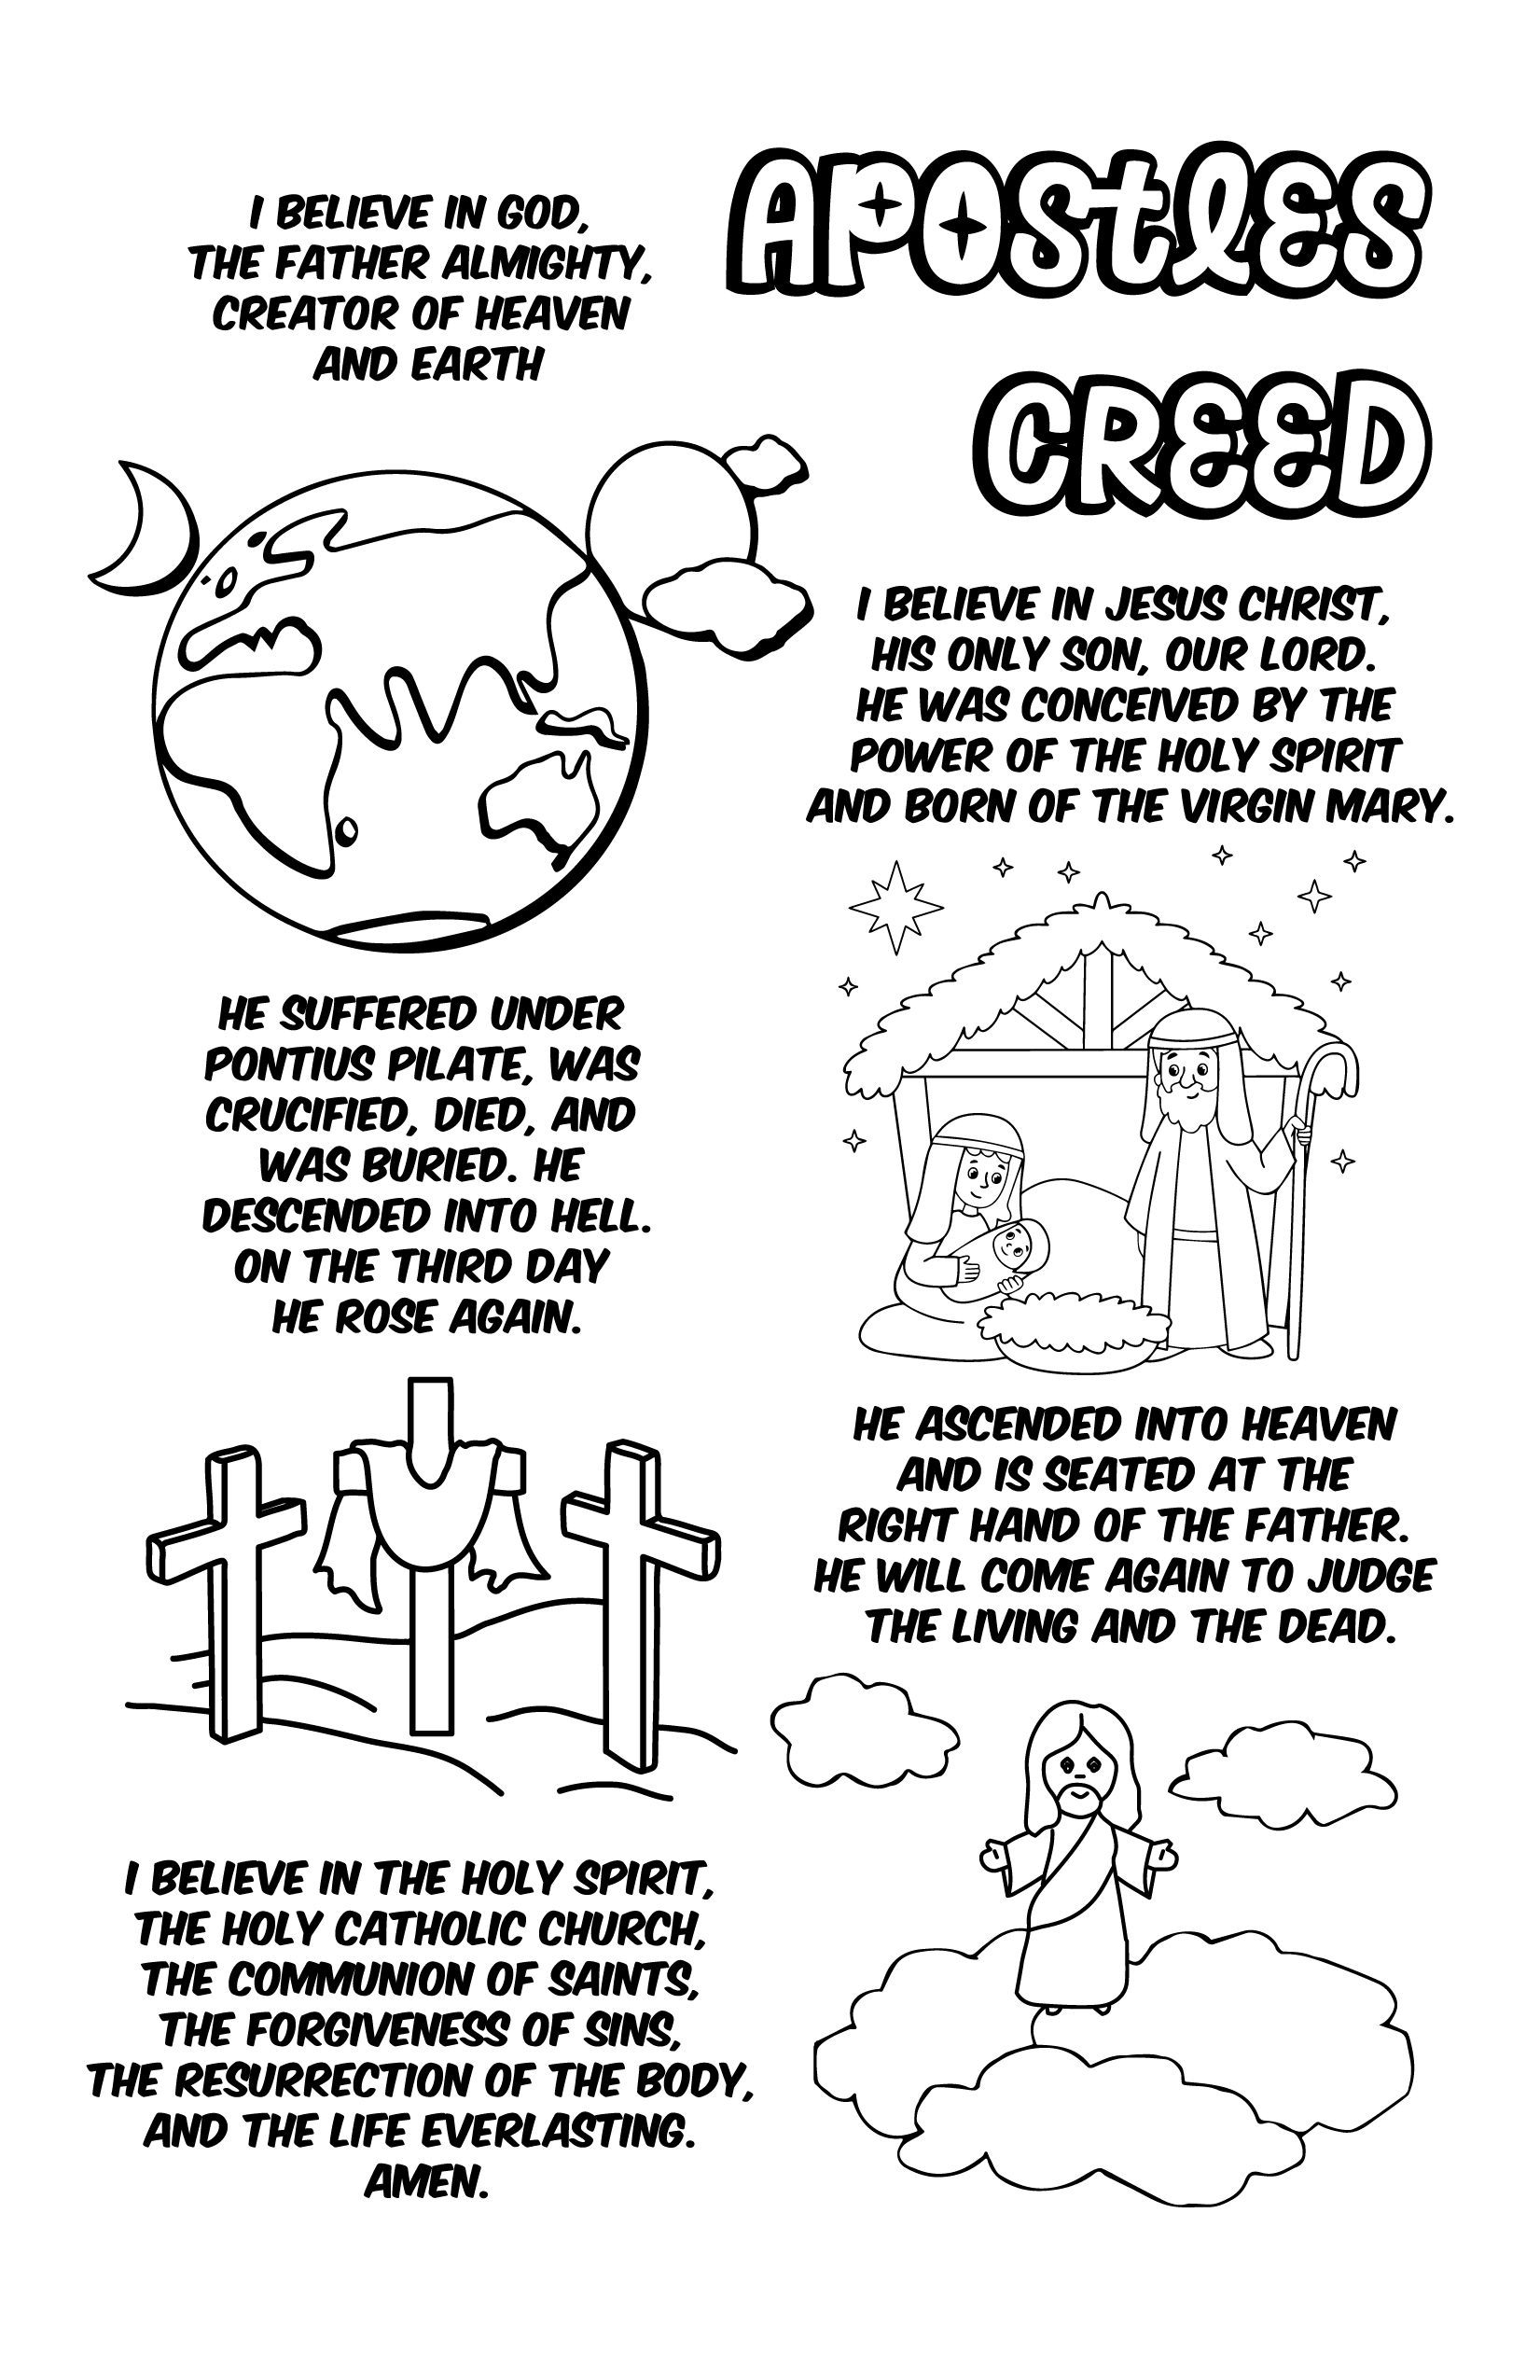 Apostles Creed Coloring Page For Ccd